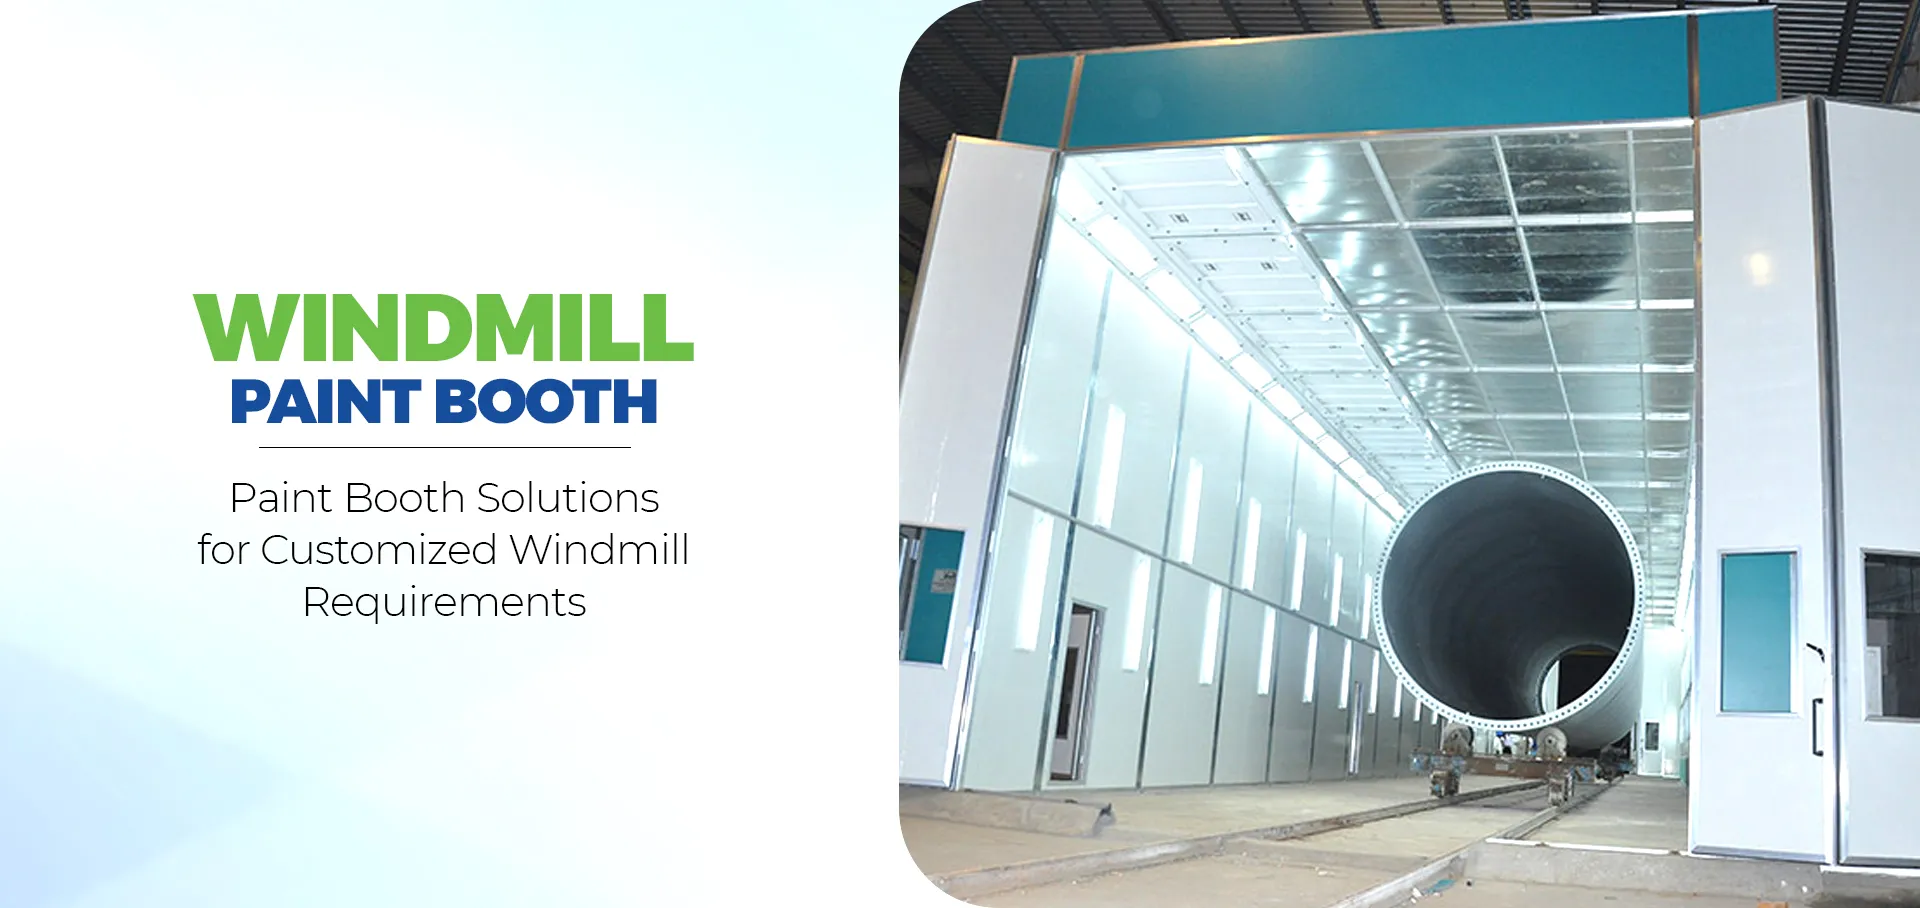 Windmill Paint Booth Manufacturers